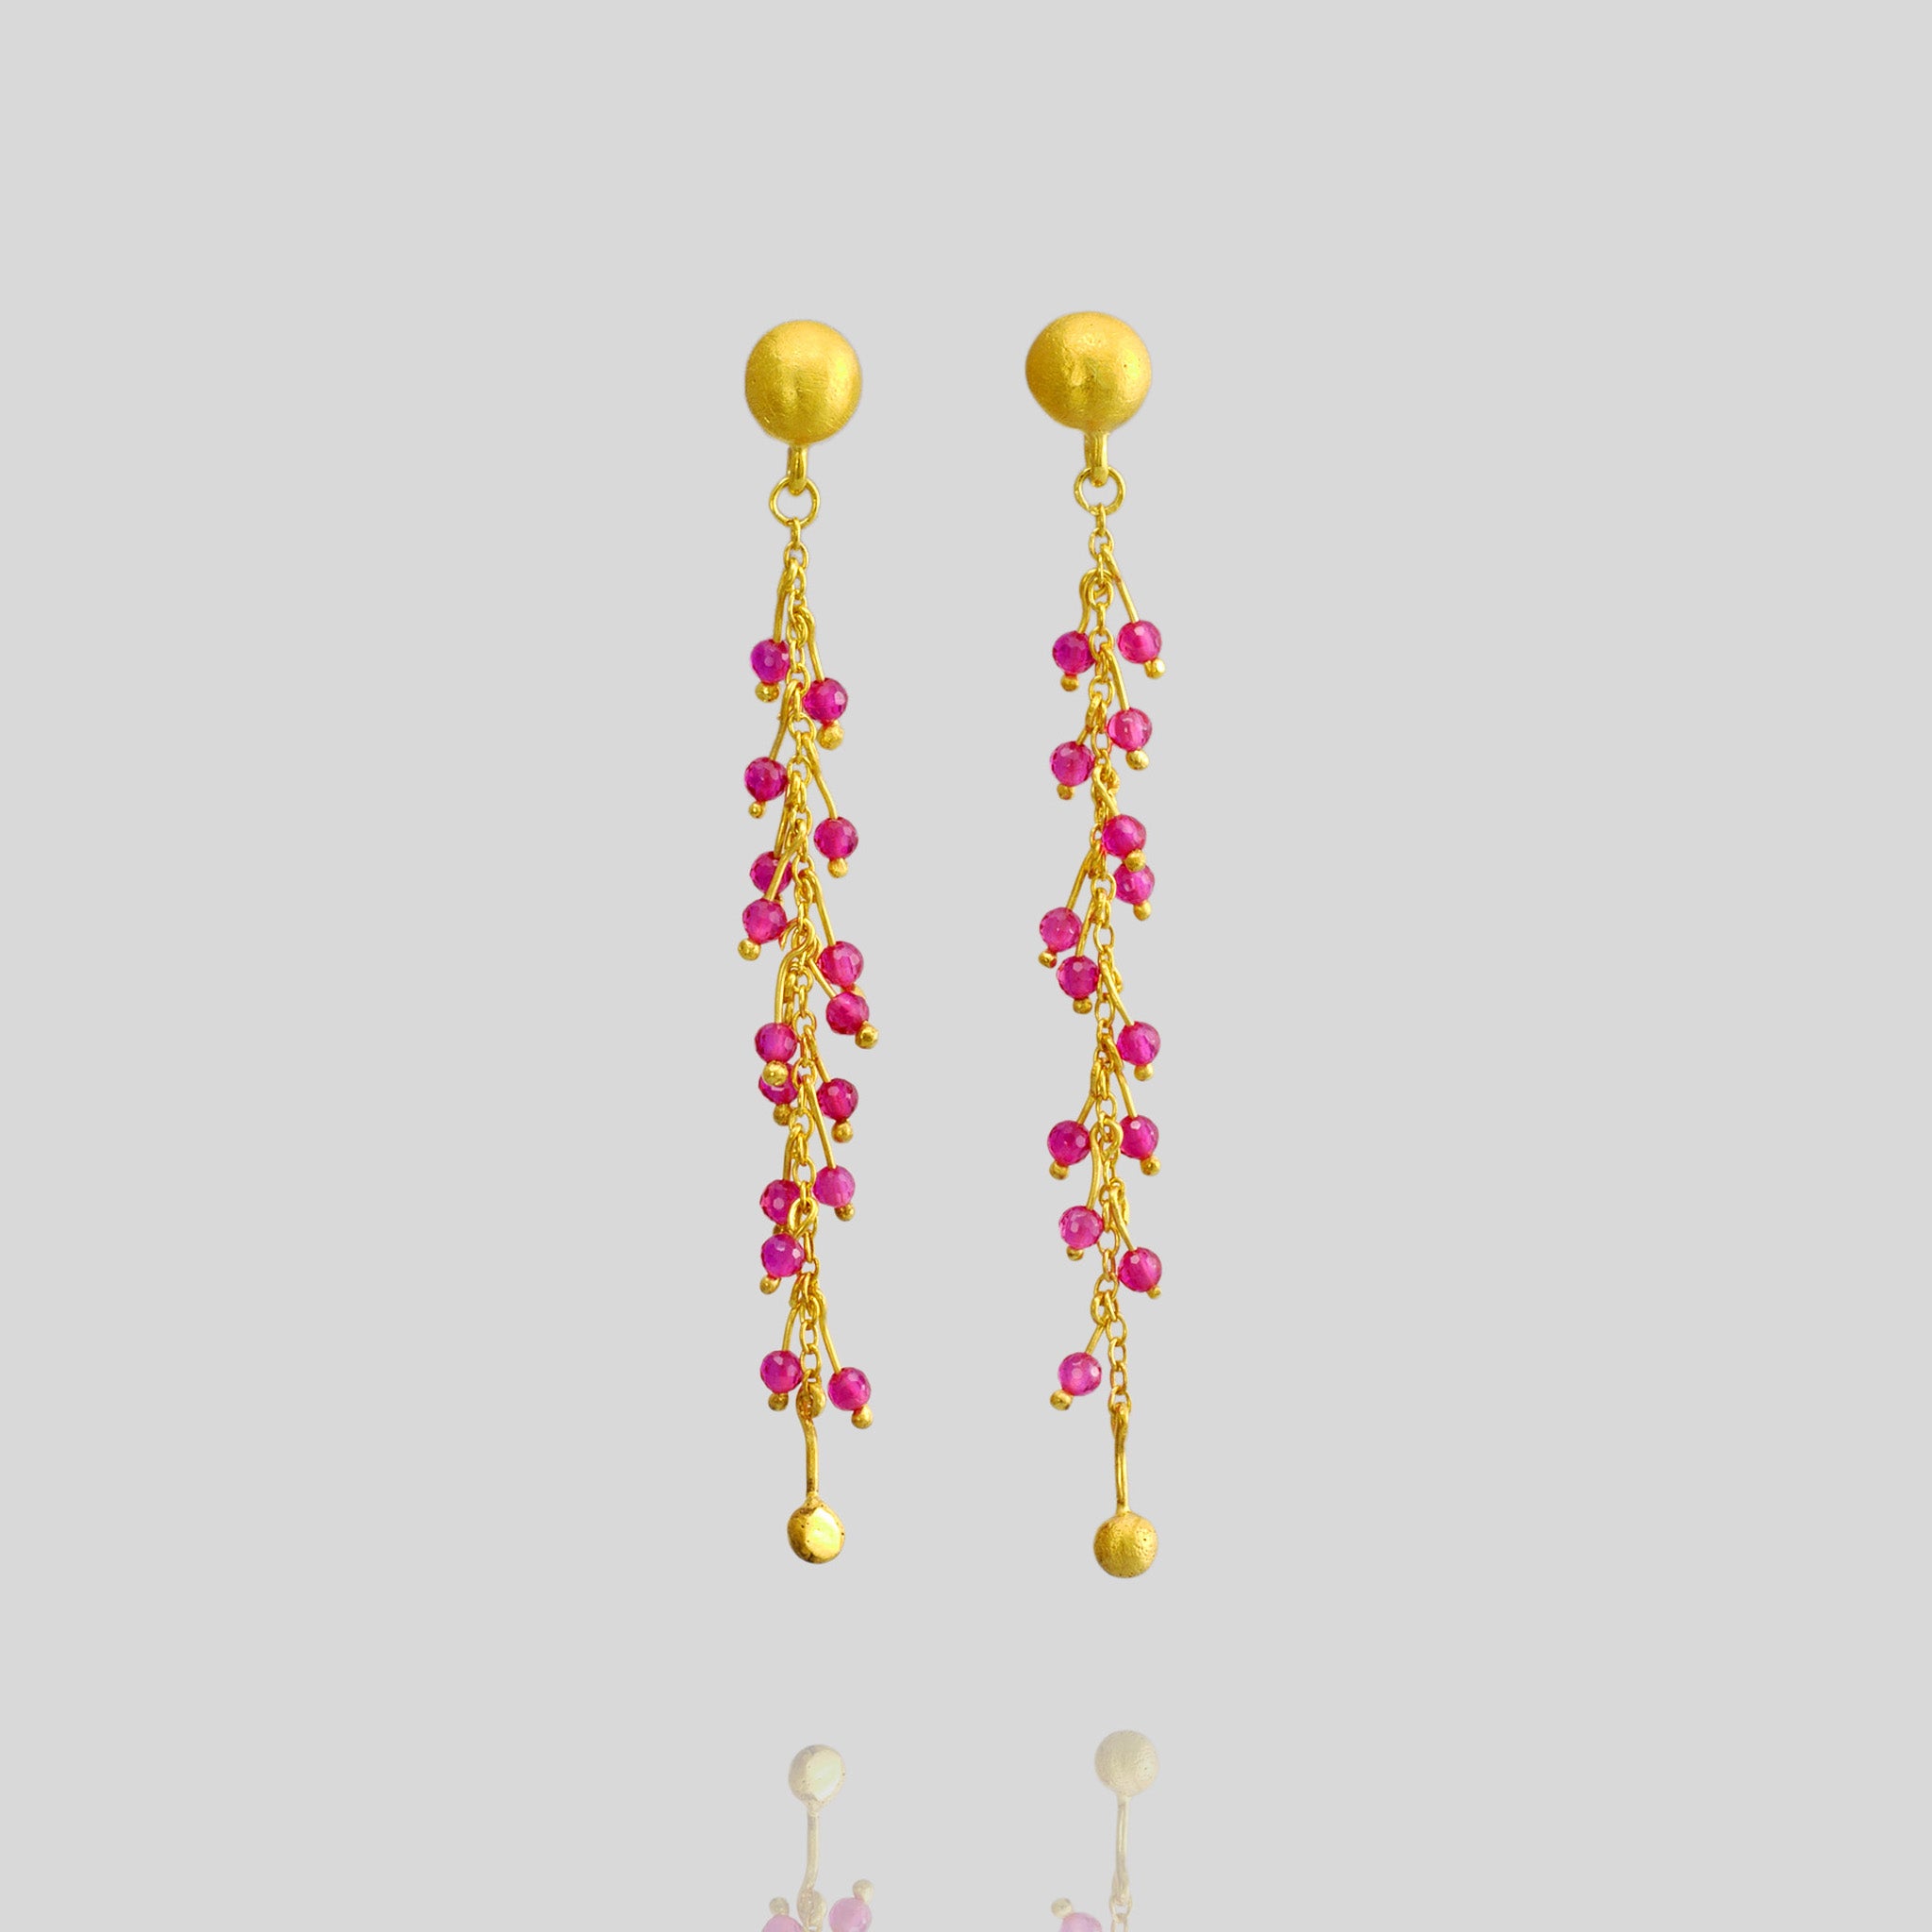 Close up of 18k gold studs adorned with radiant ruby beads on shimmering gold threads, inspired by Venus emerging from the sea.